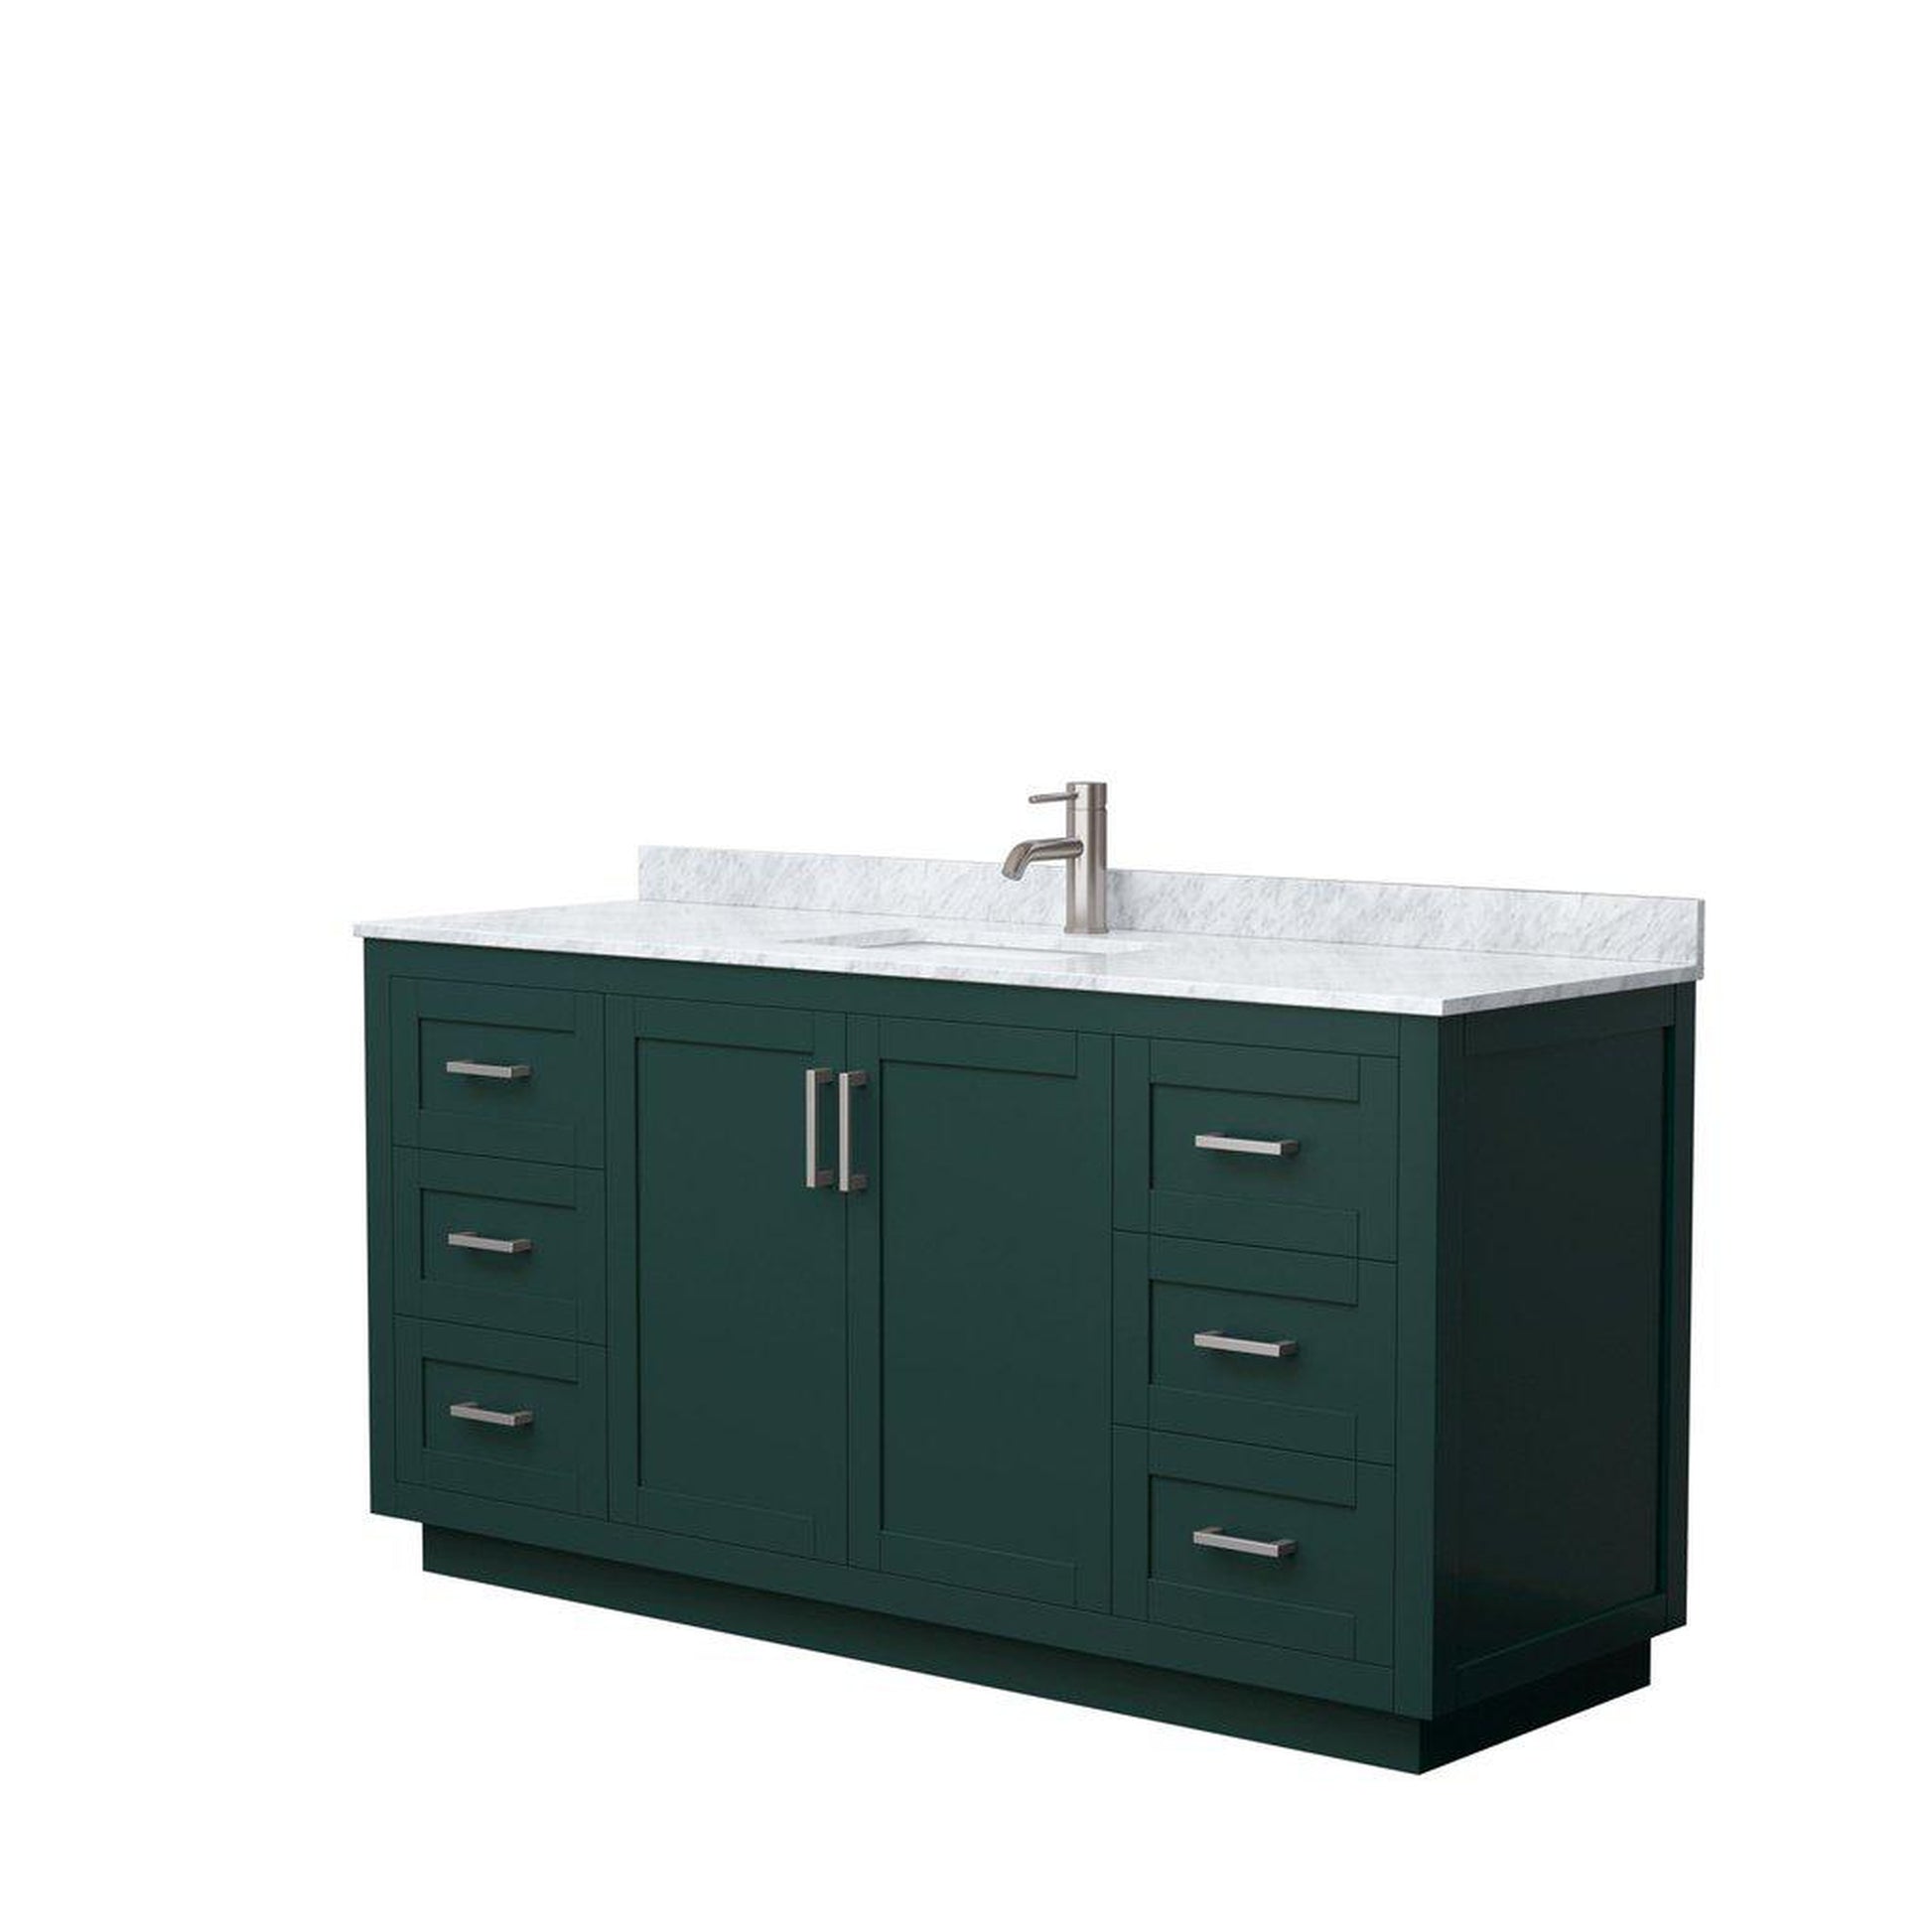 Wyndham Collection Miranda 66" Single Bathroom Green Vanity Set With White Carrara Marble Countertop, Undermount Square Sink, And Brushed Nickel Trim